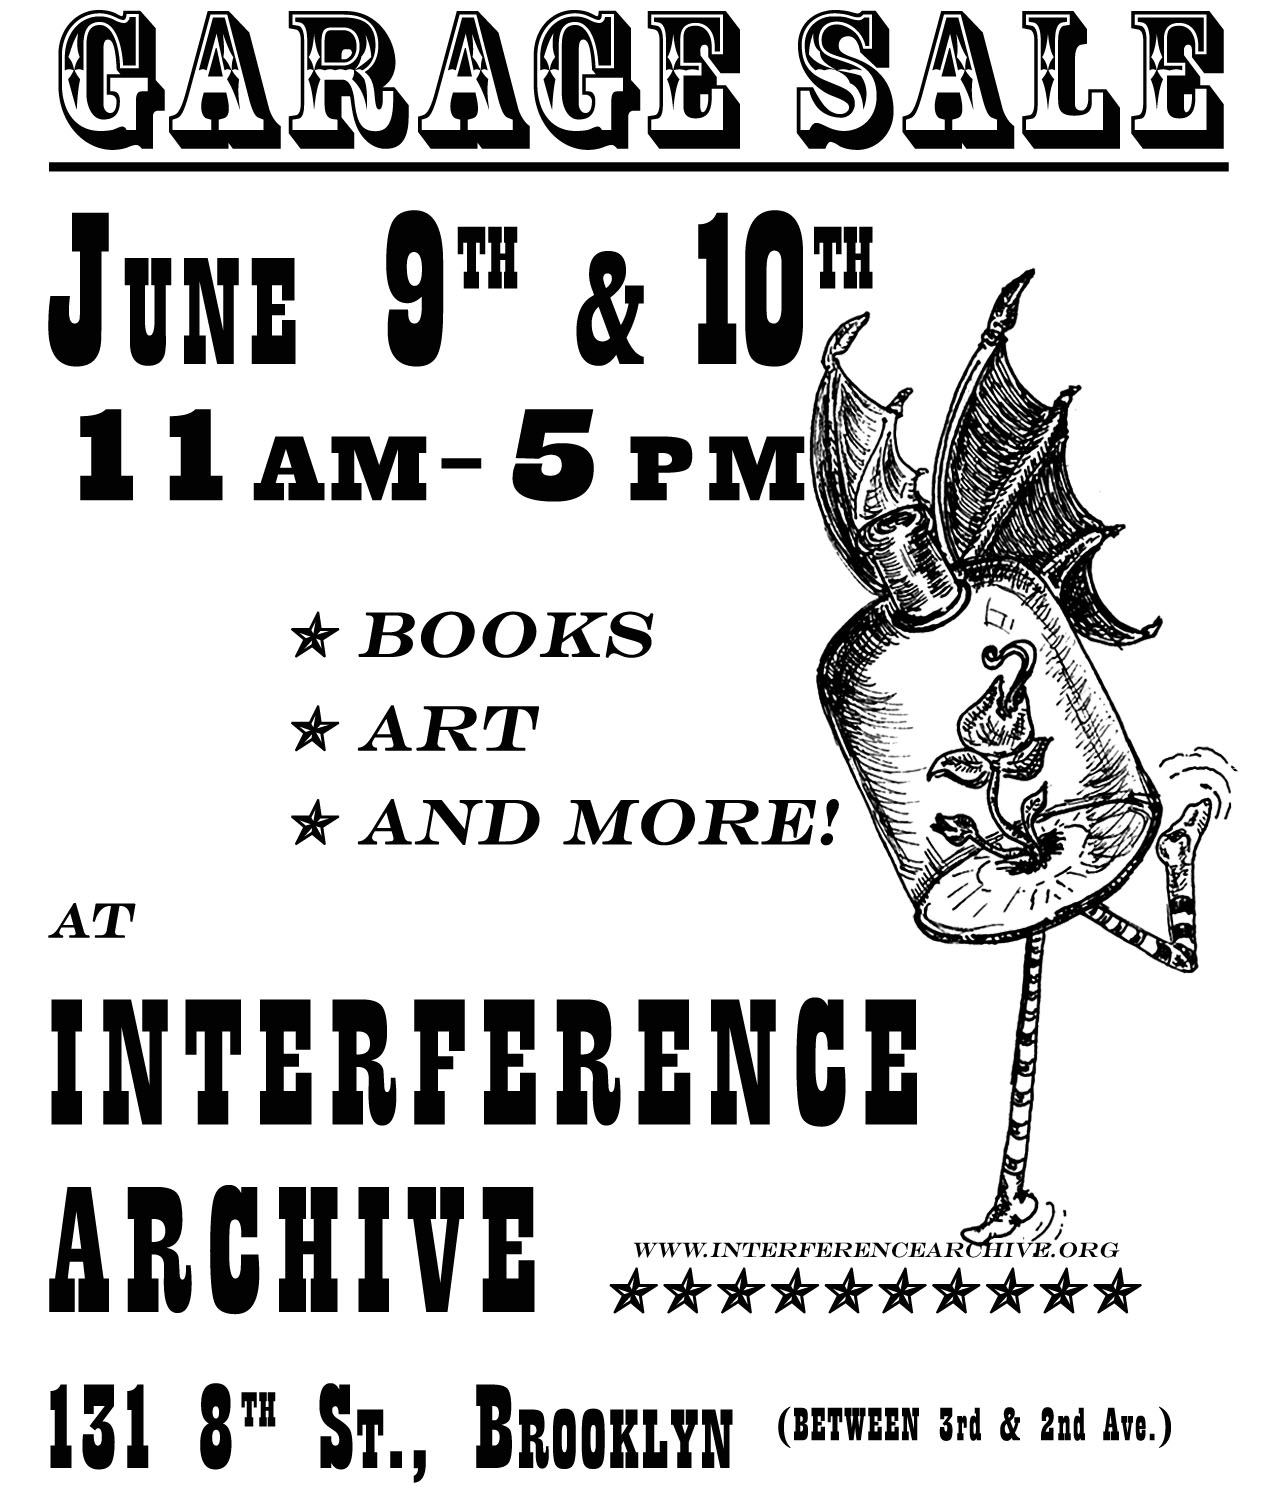 Interference Archive is having a spring cleaning yard sale!